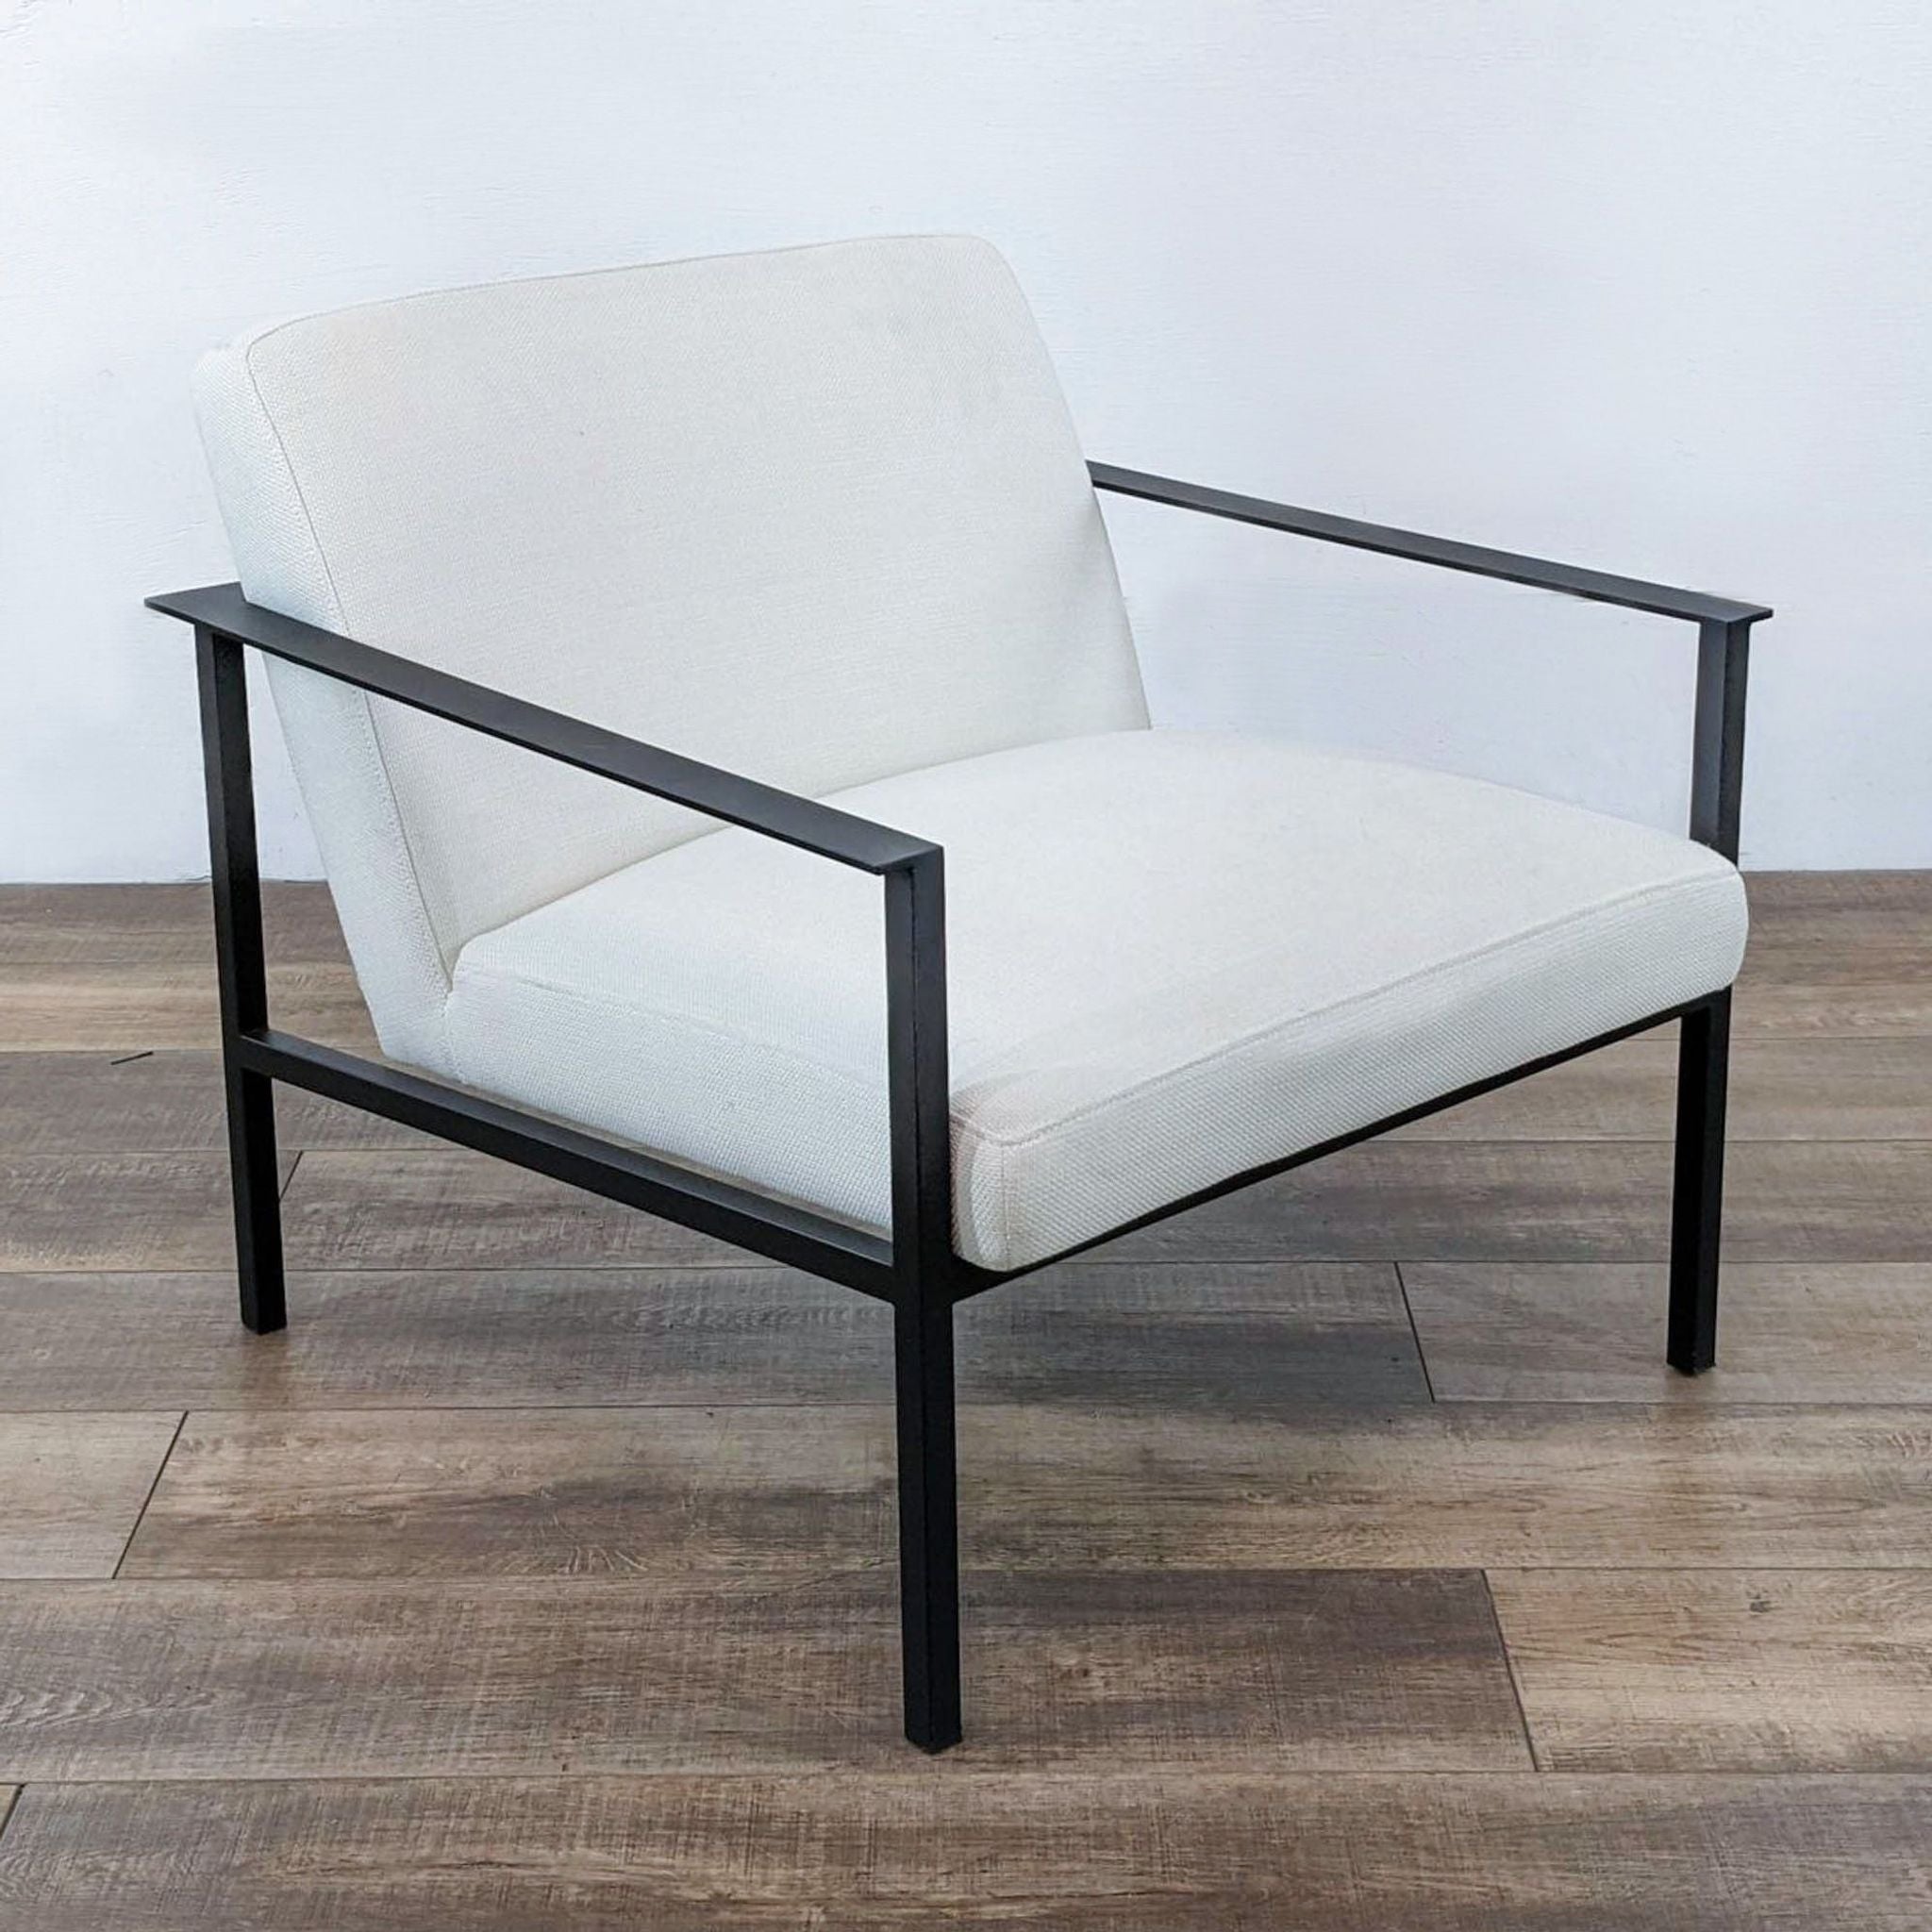 CB2 Cue chair with a sleek matte black frame and textured white fabric on a wooden floor, representing modern lounge style.